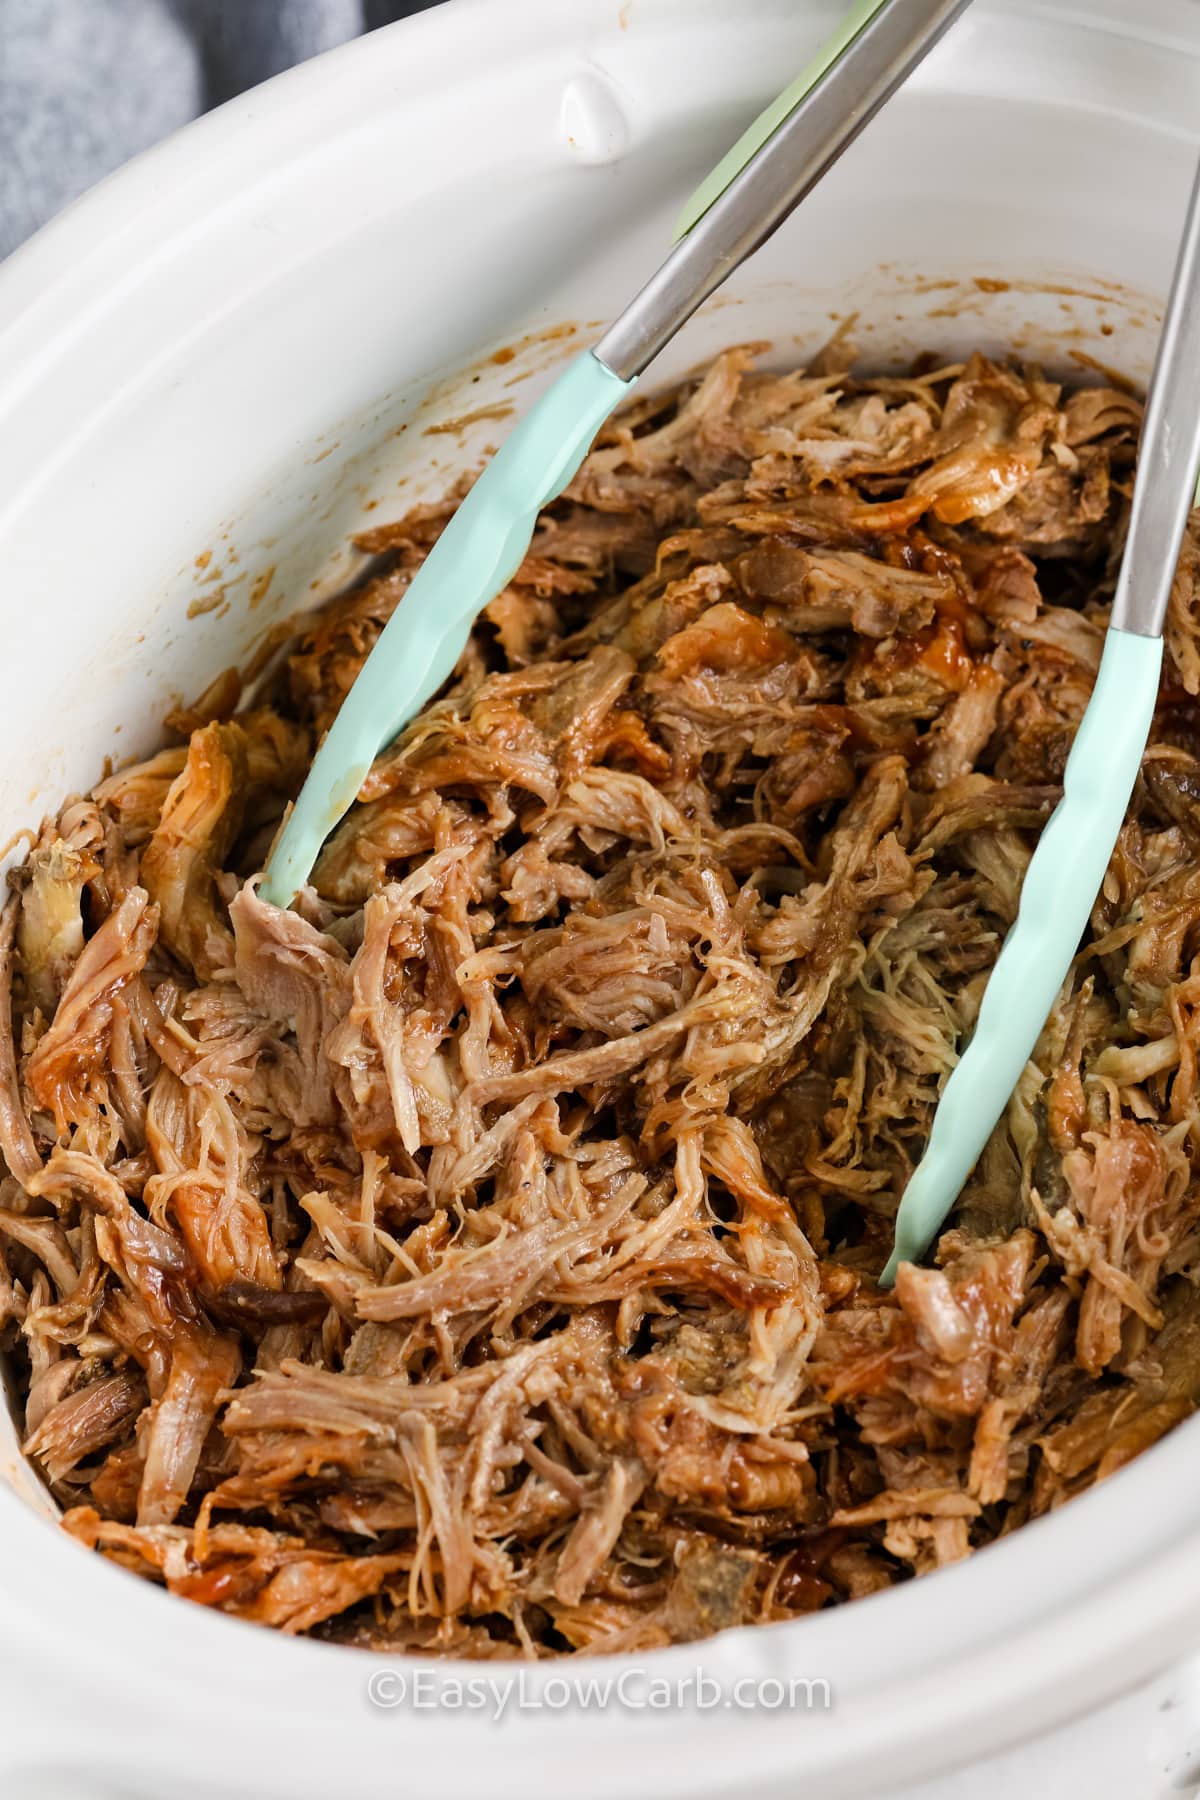 Shredded pulled pork in a crock pot with tongs